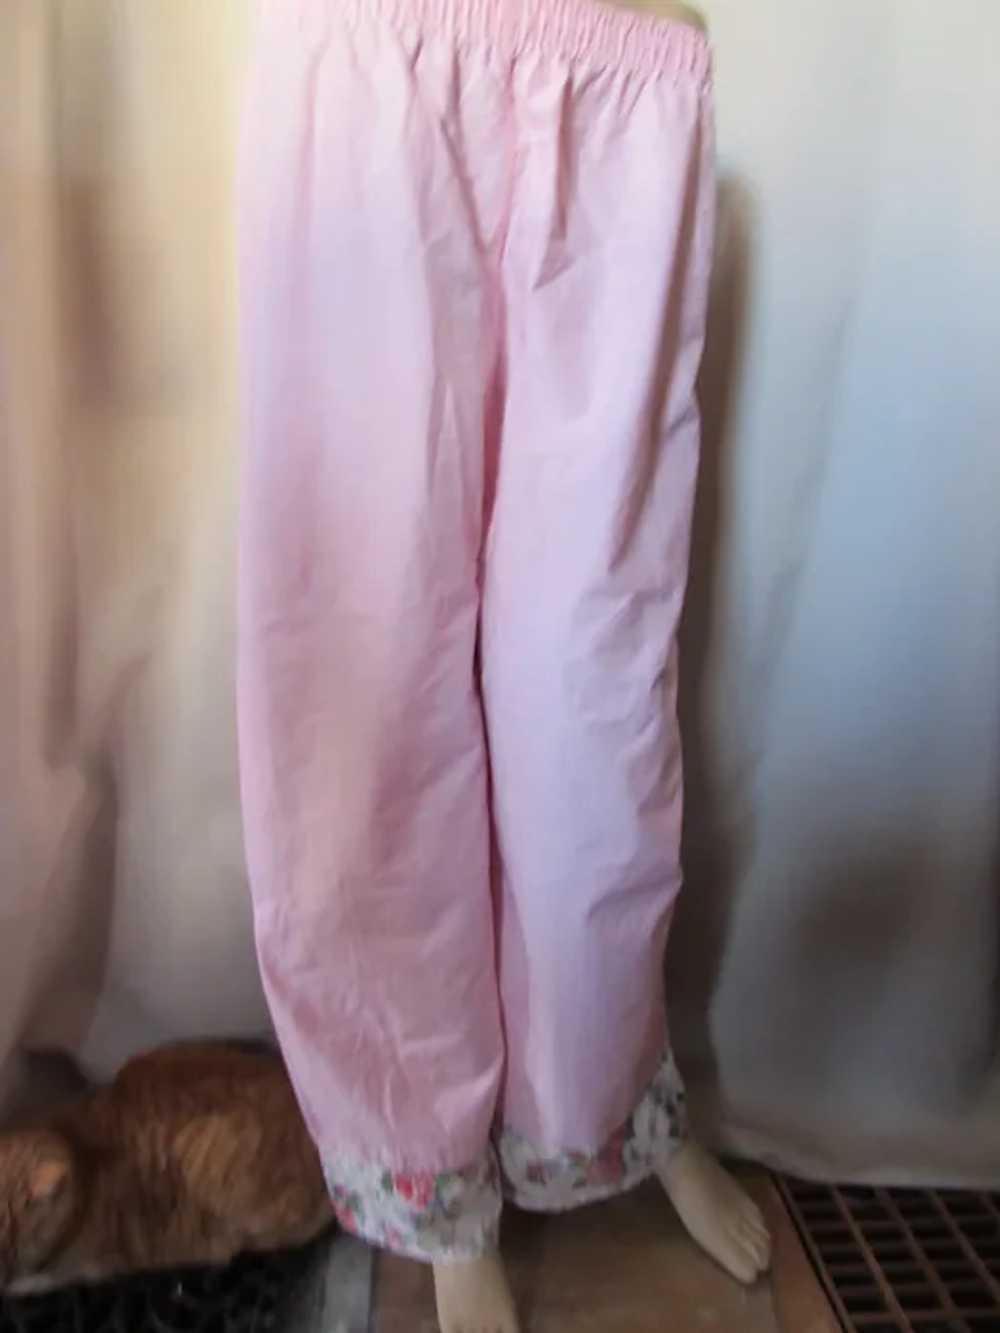 SALE Cute Vintage PJ Bottoms in Pink Cotton Cabba… - image 2